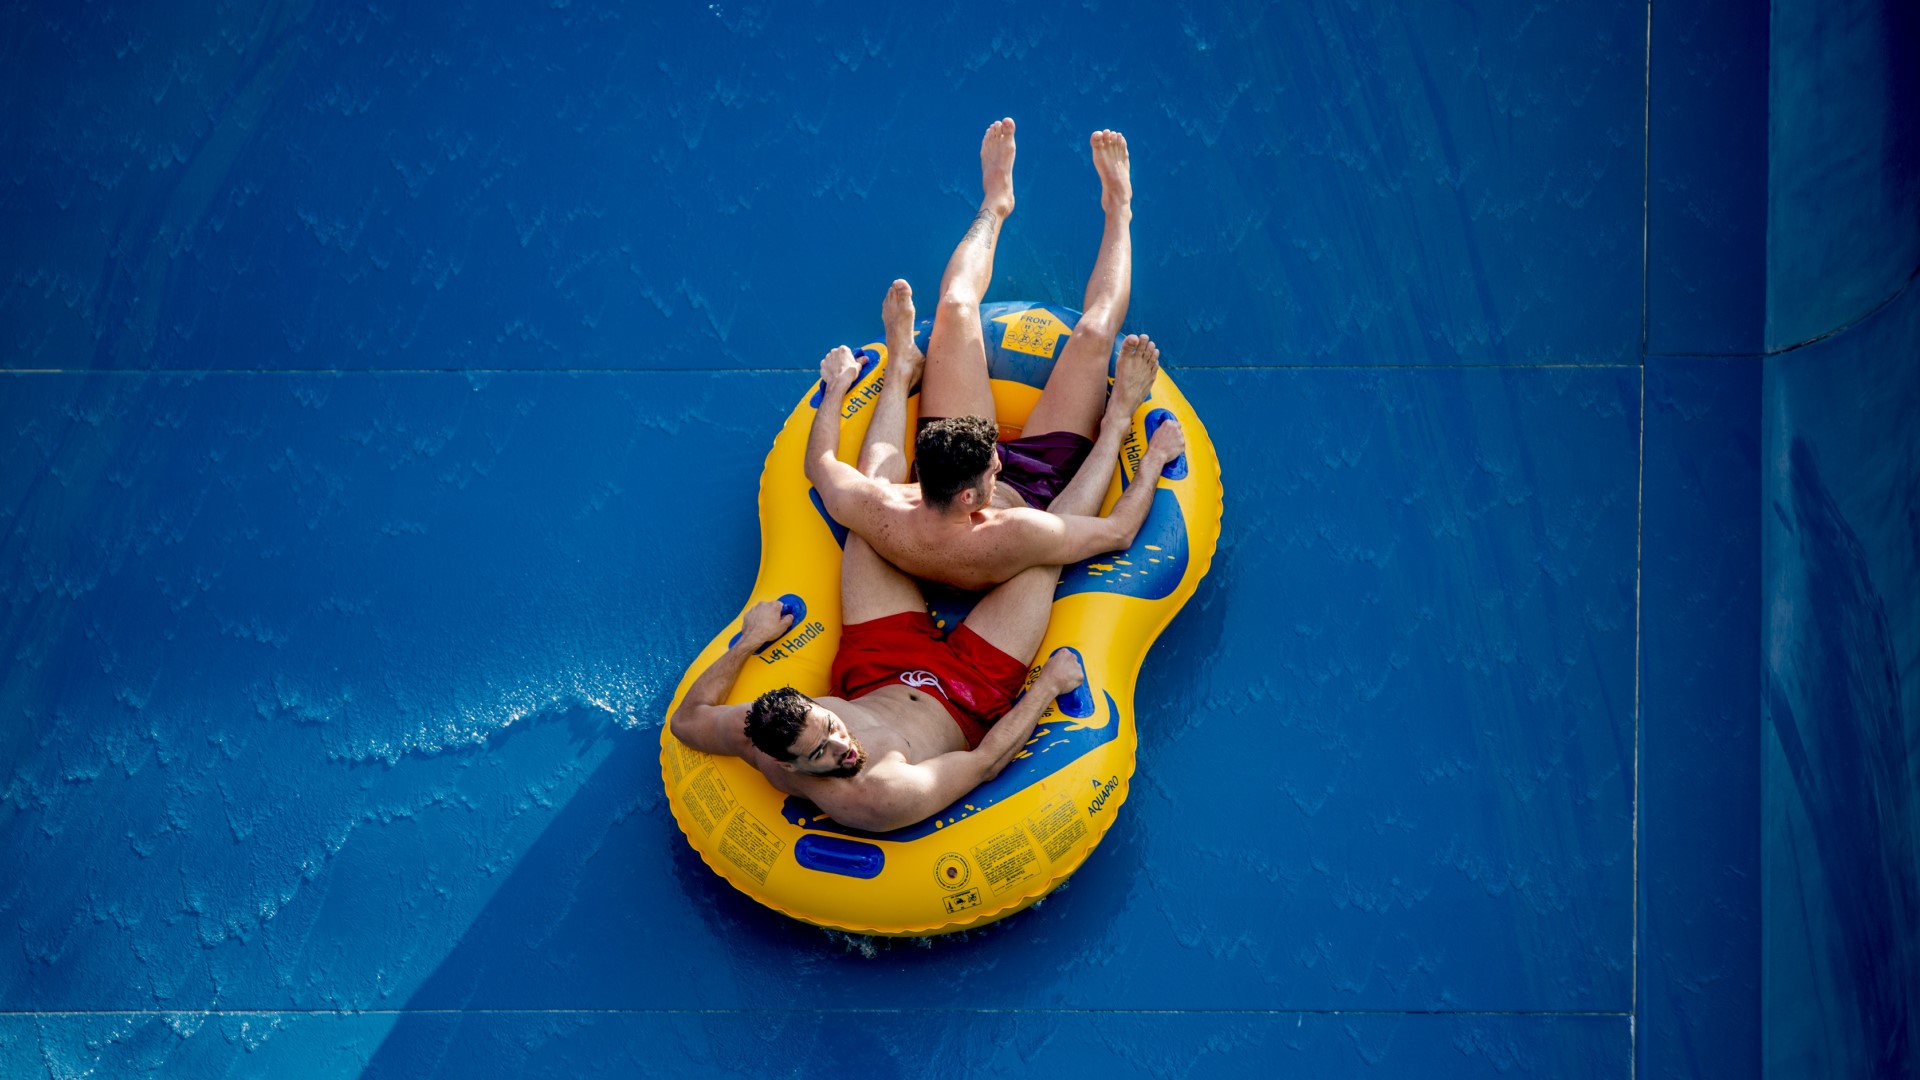 The water park season ends on August 31